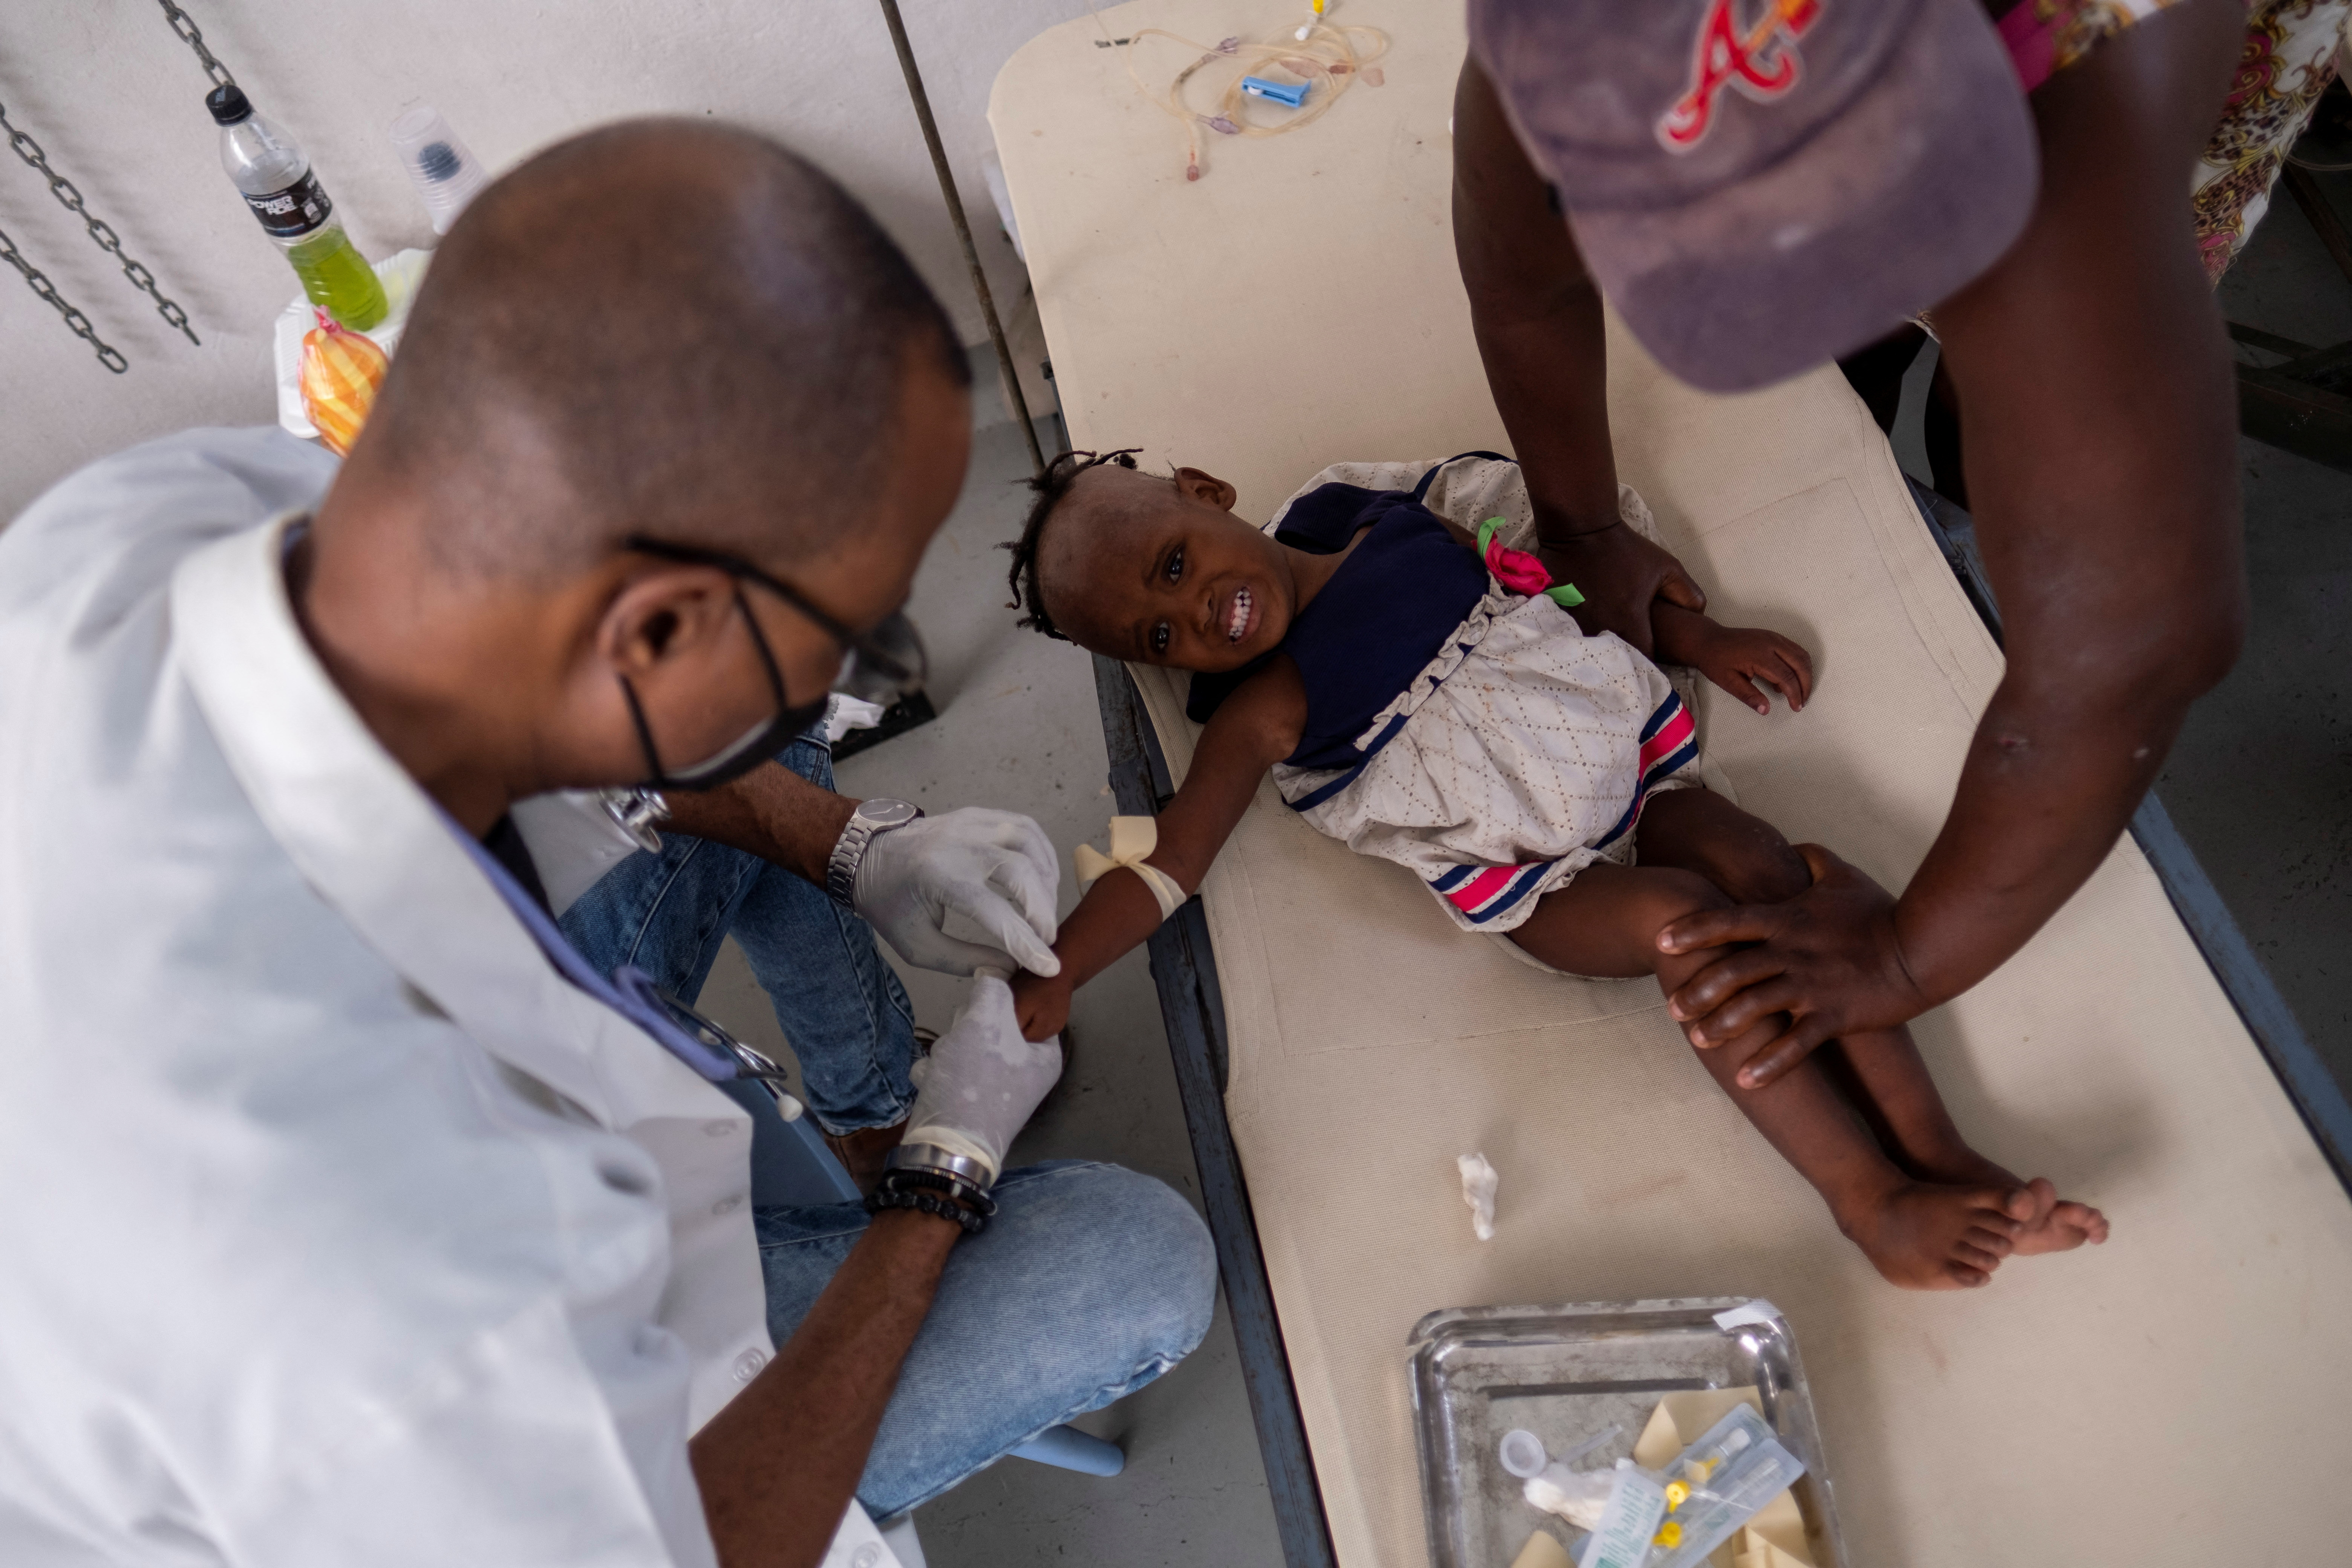 A doctor treats 3-year-old Camare St Ville at the UNICEF-supported Gheskio Center Hospital in Port-au-Prince, Haiti, on October 14, 2022.  REUTERS/Ricardo Arduengo/File